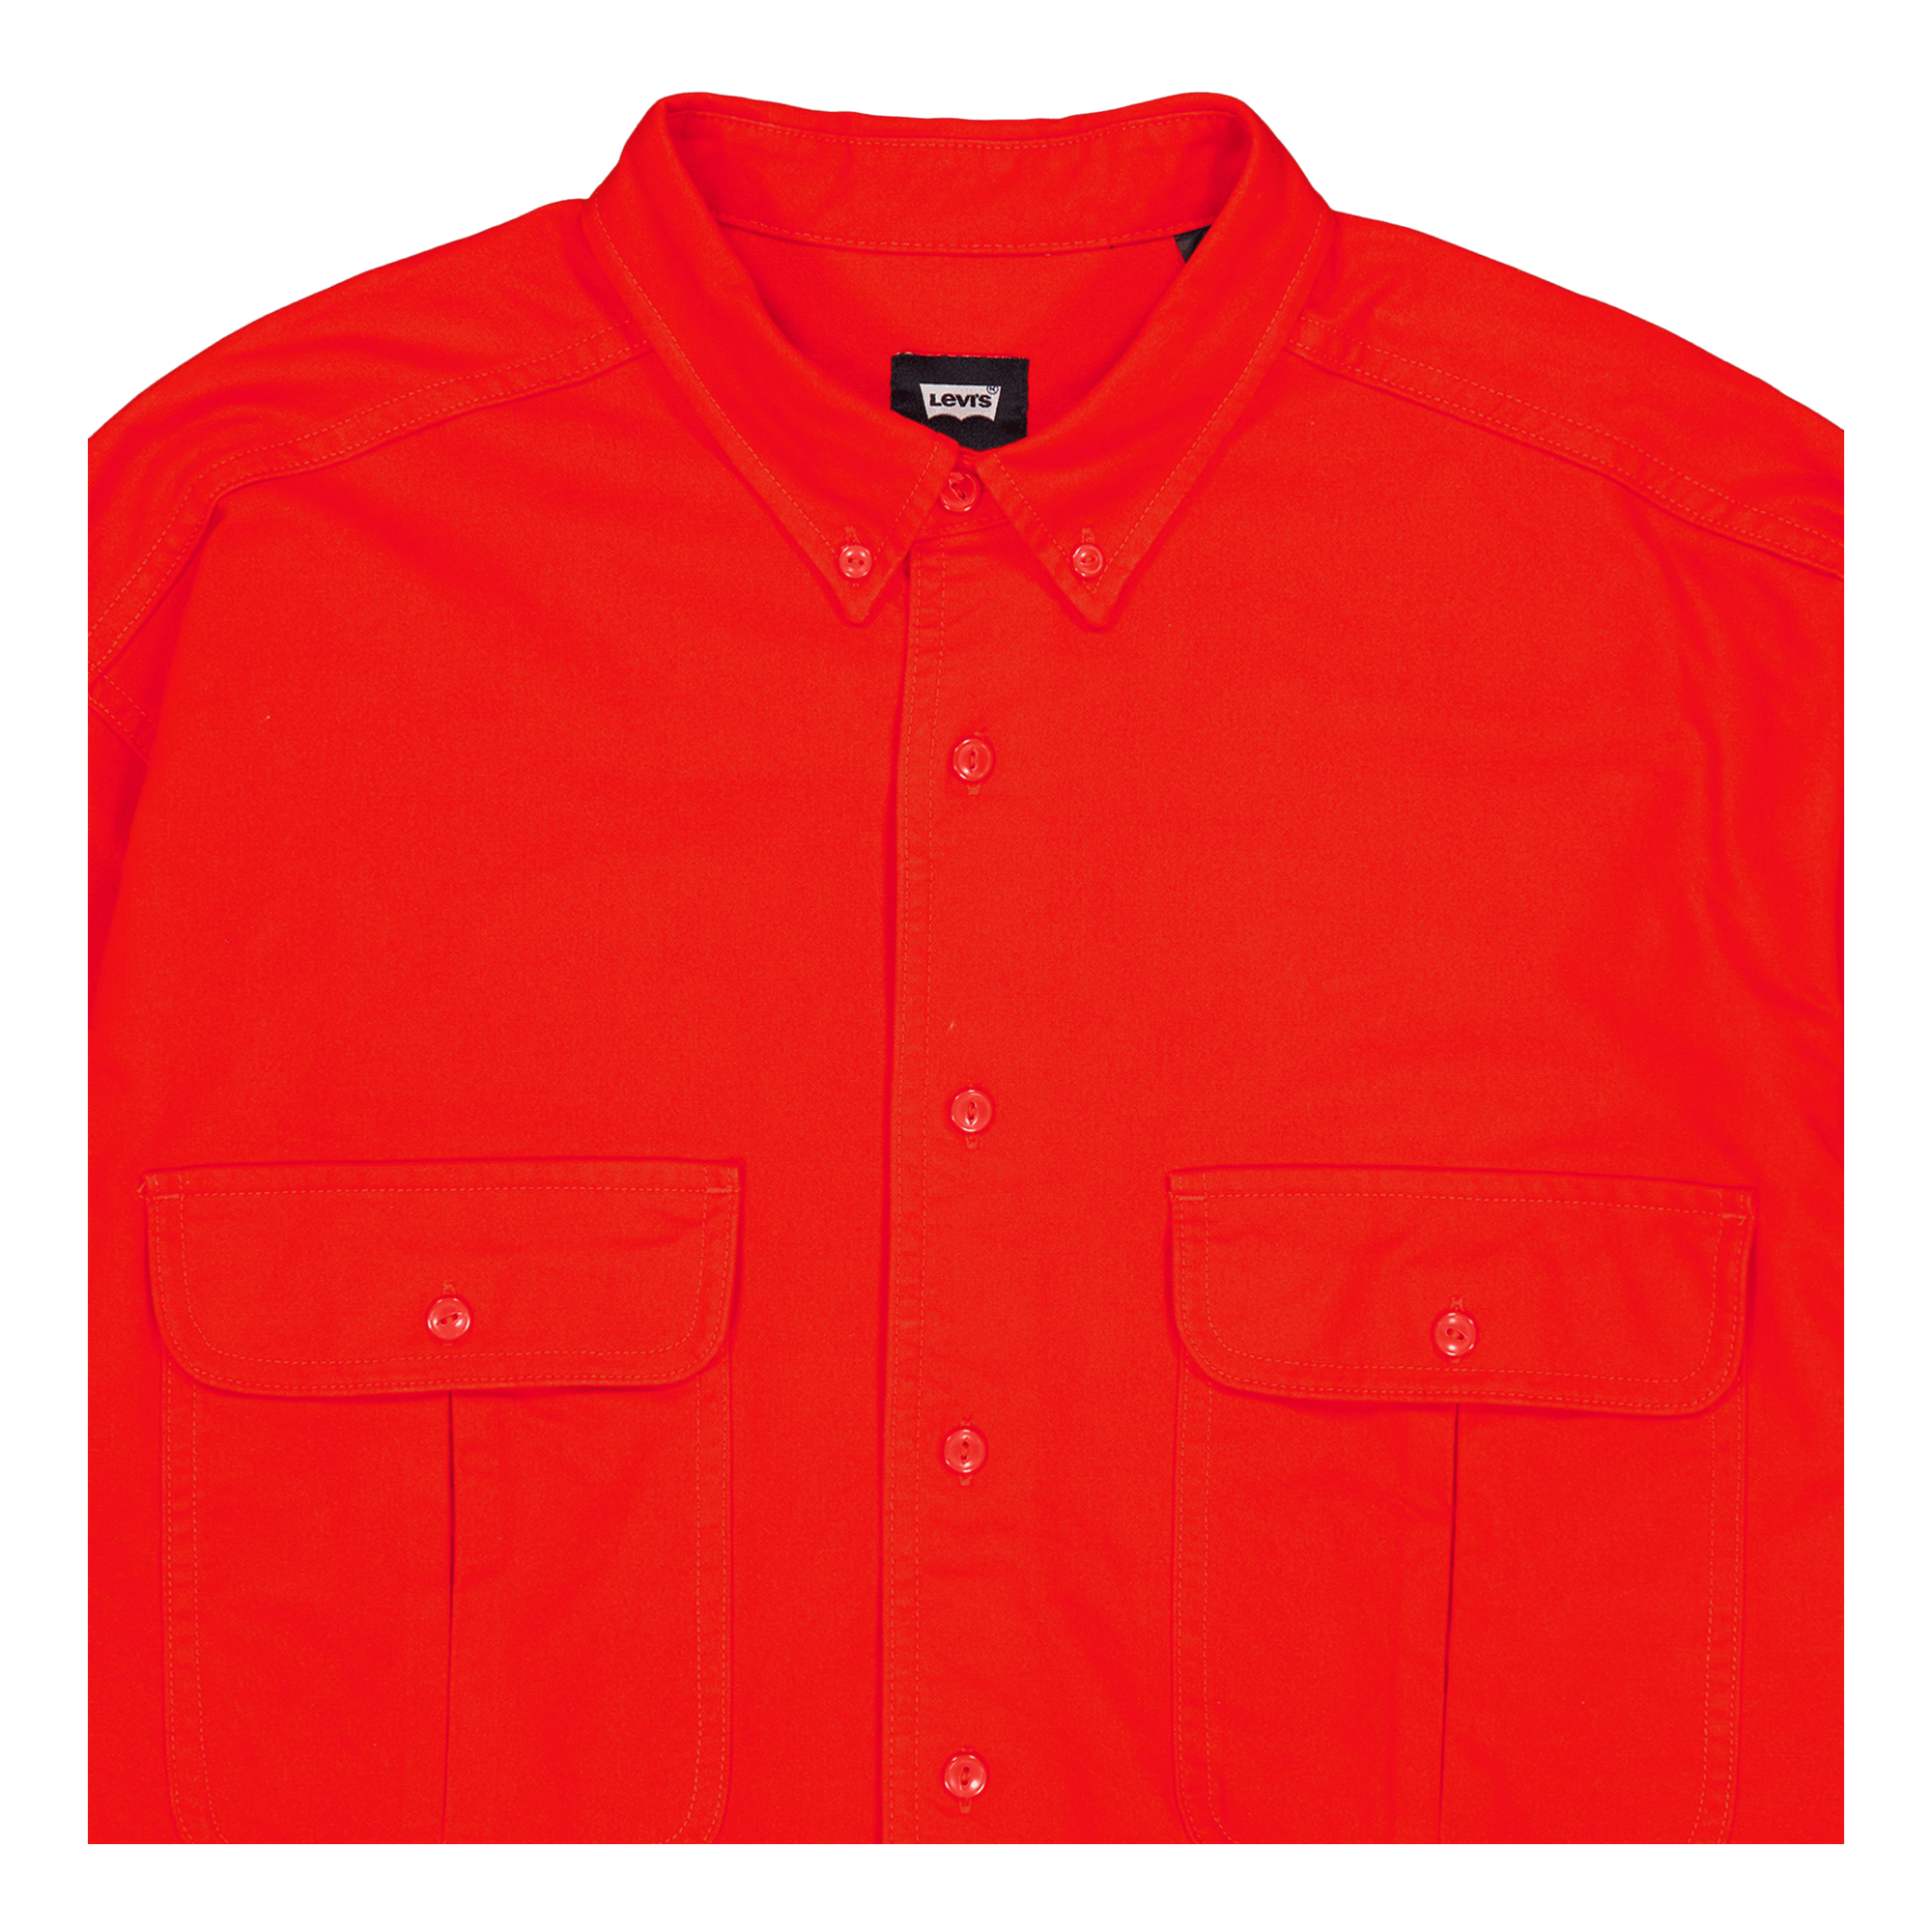 Skate L/s Woven Reds Fiery Red